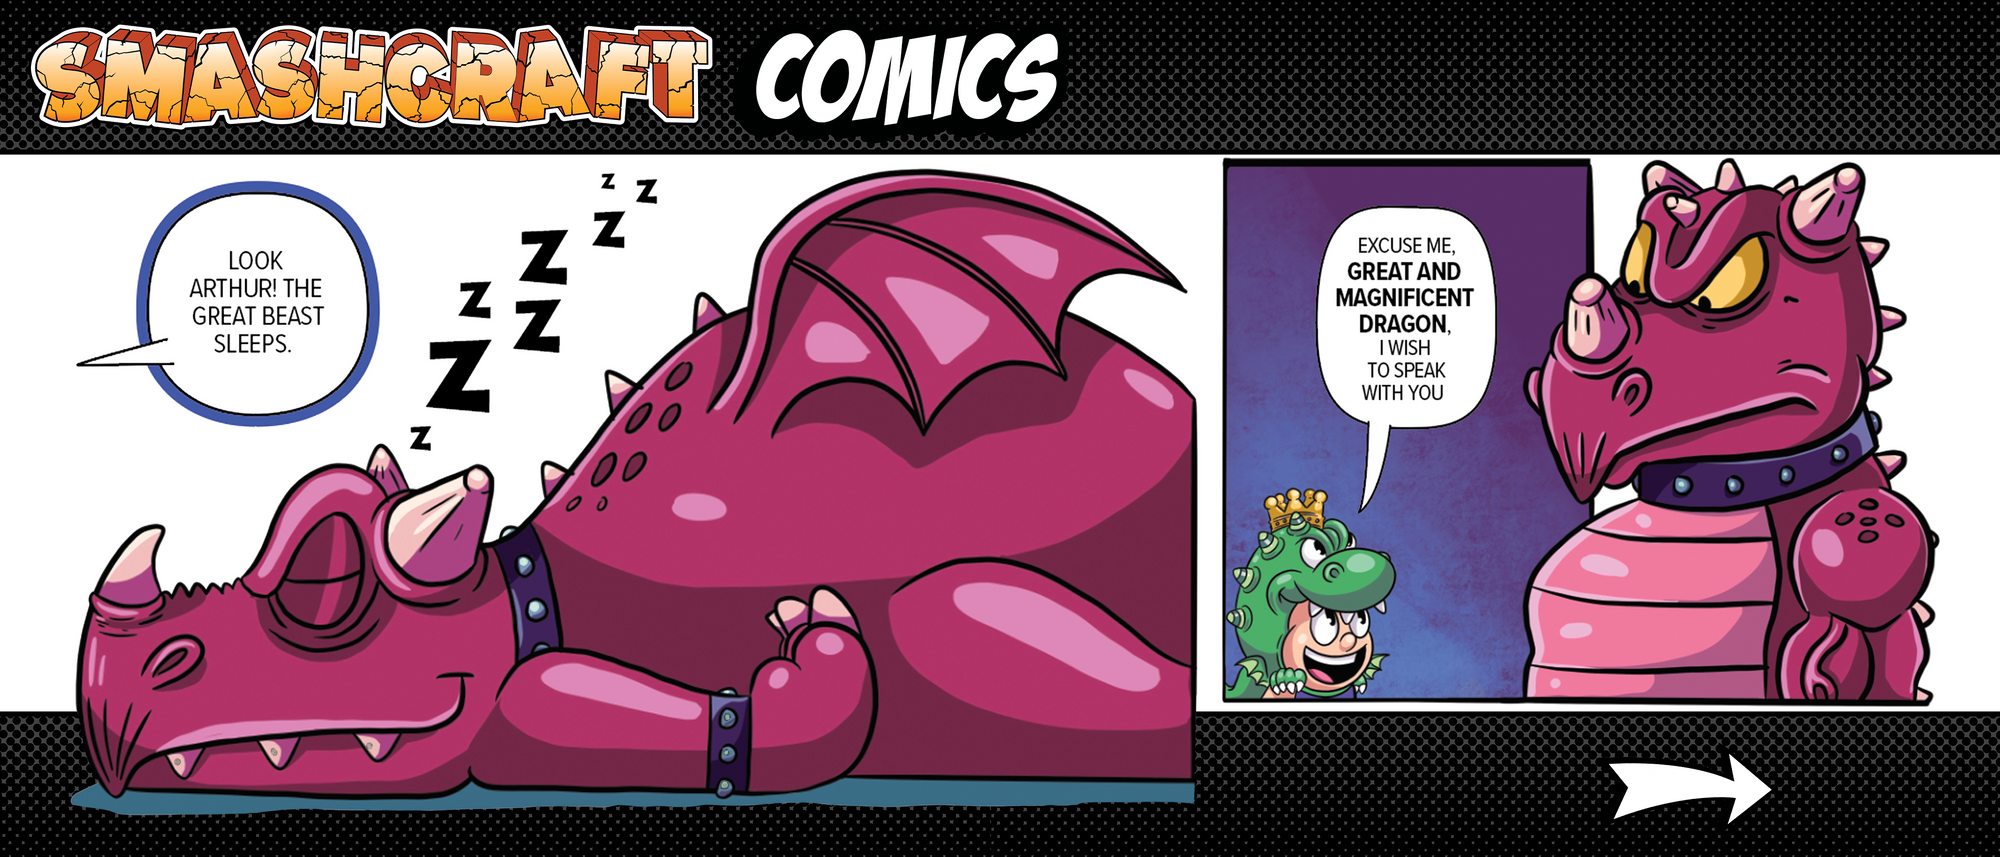 Comic strip showing a magenta dragon sleeping and King arthur approaching the dragon for a conversation.